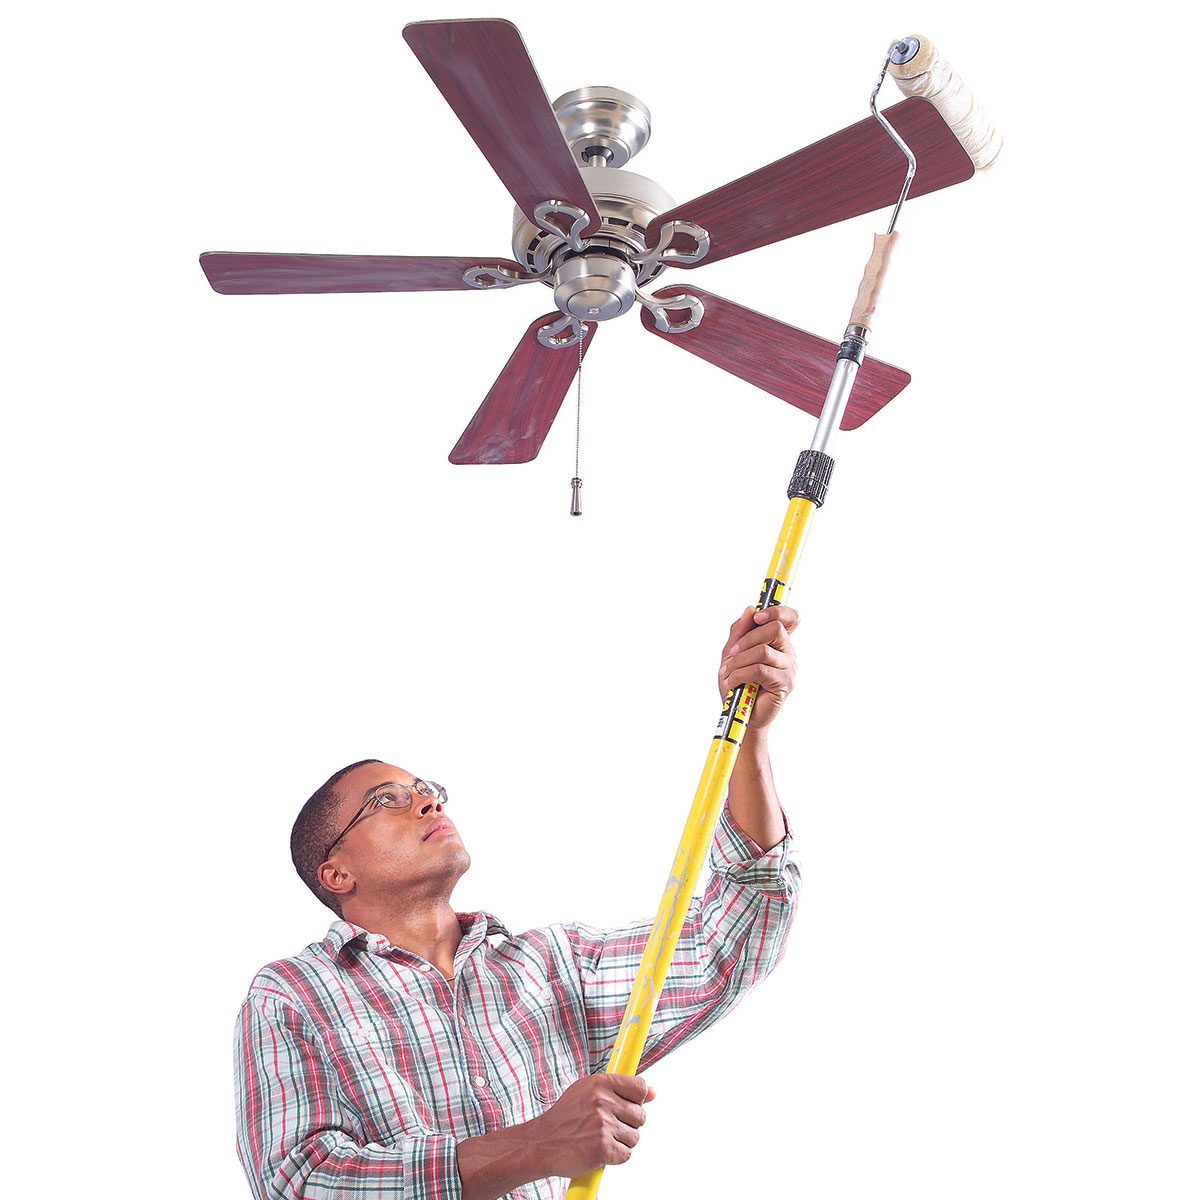 Dusting a ceiling fan with a paint roller | Construction Pro Tips